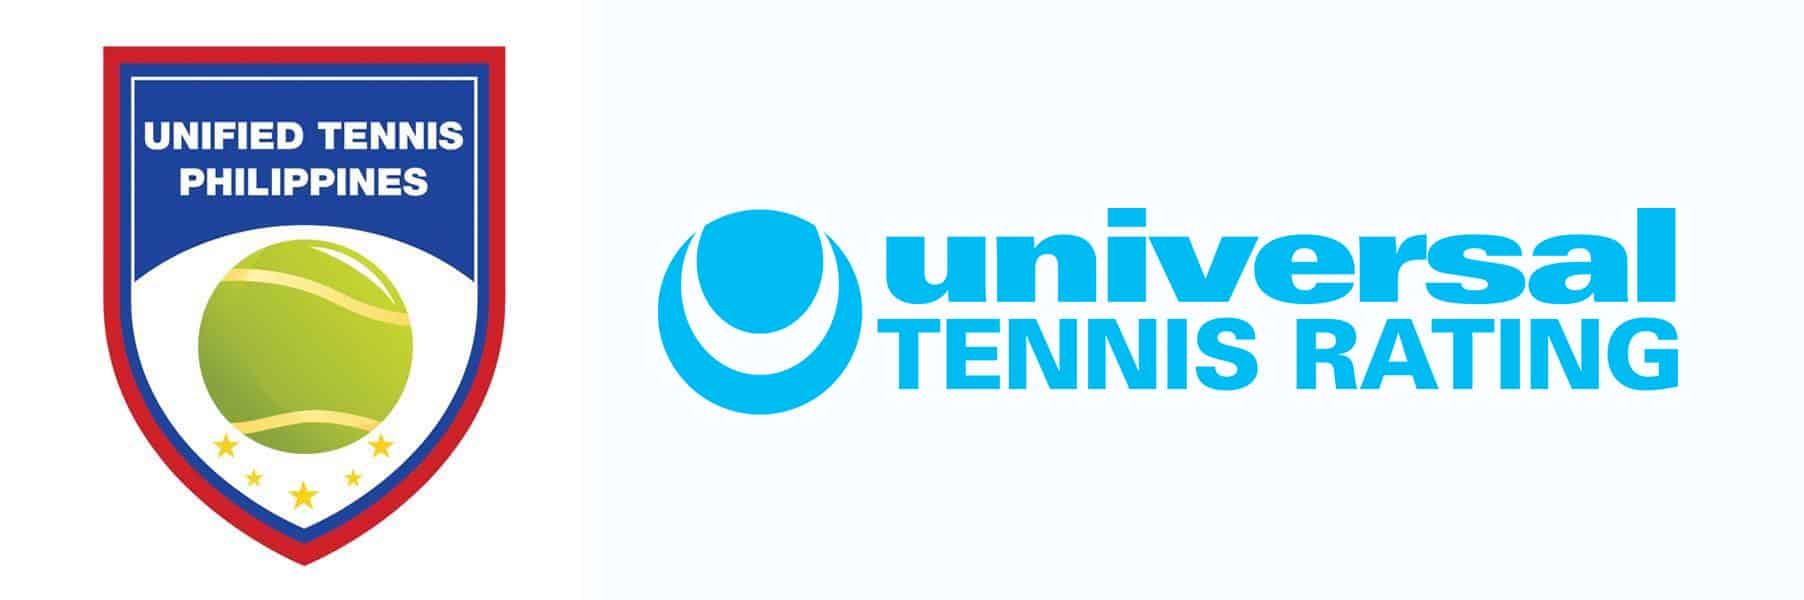 UTP partners with Universal Tennis Rating for skill level measurement